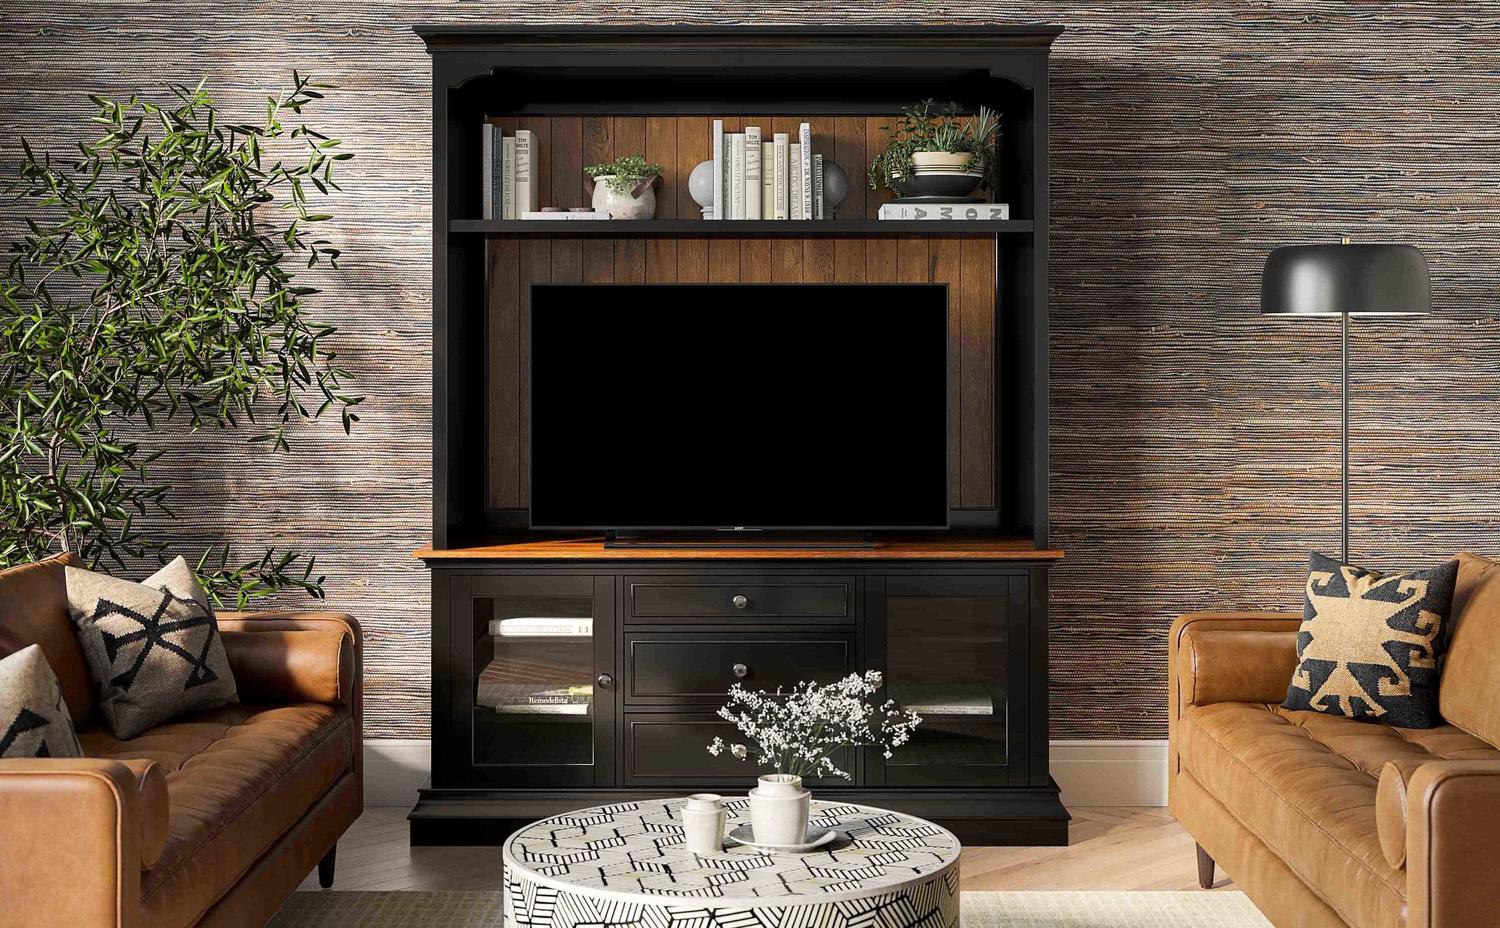 tv console with storage Tov Furniture Entertainment Centers Charcoal